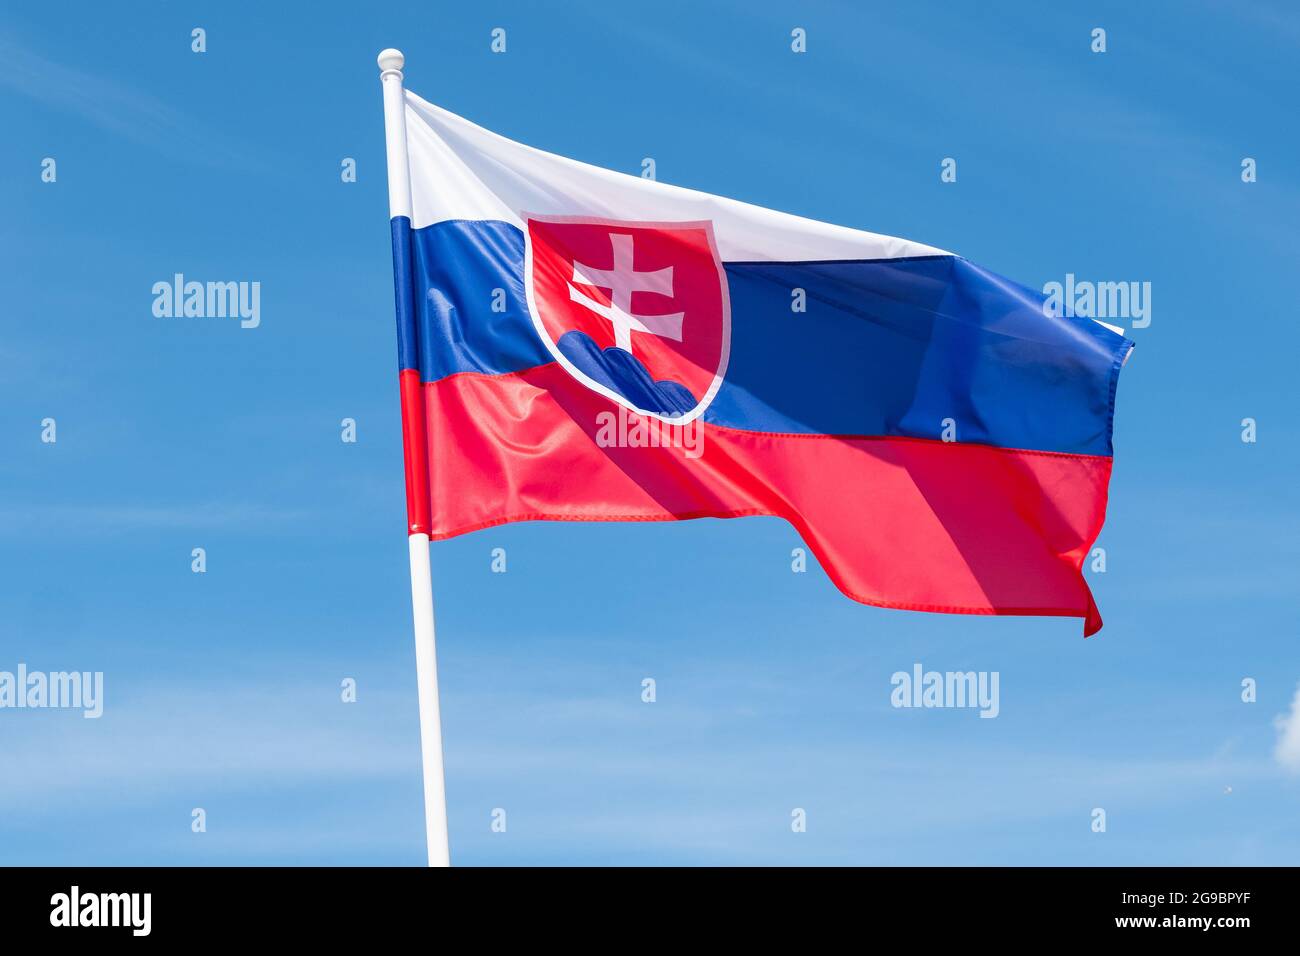 Flag of Slovakia on blue sky background. Slovak flag waving in wind and sunlight Stock Photo